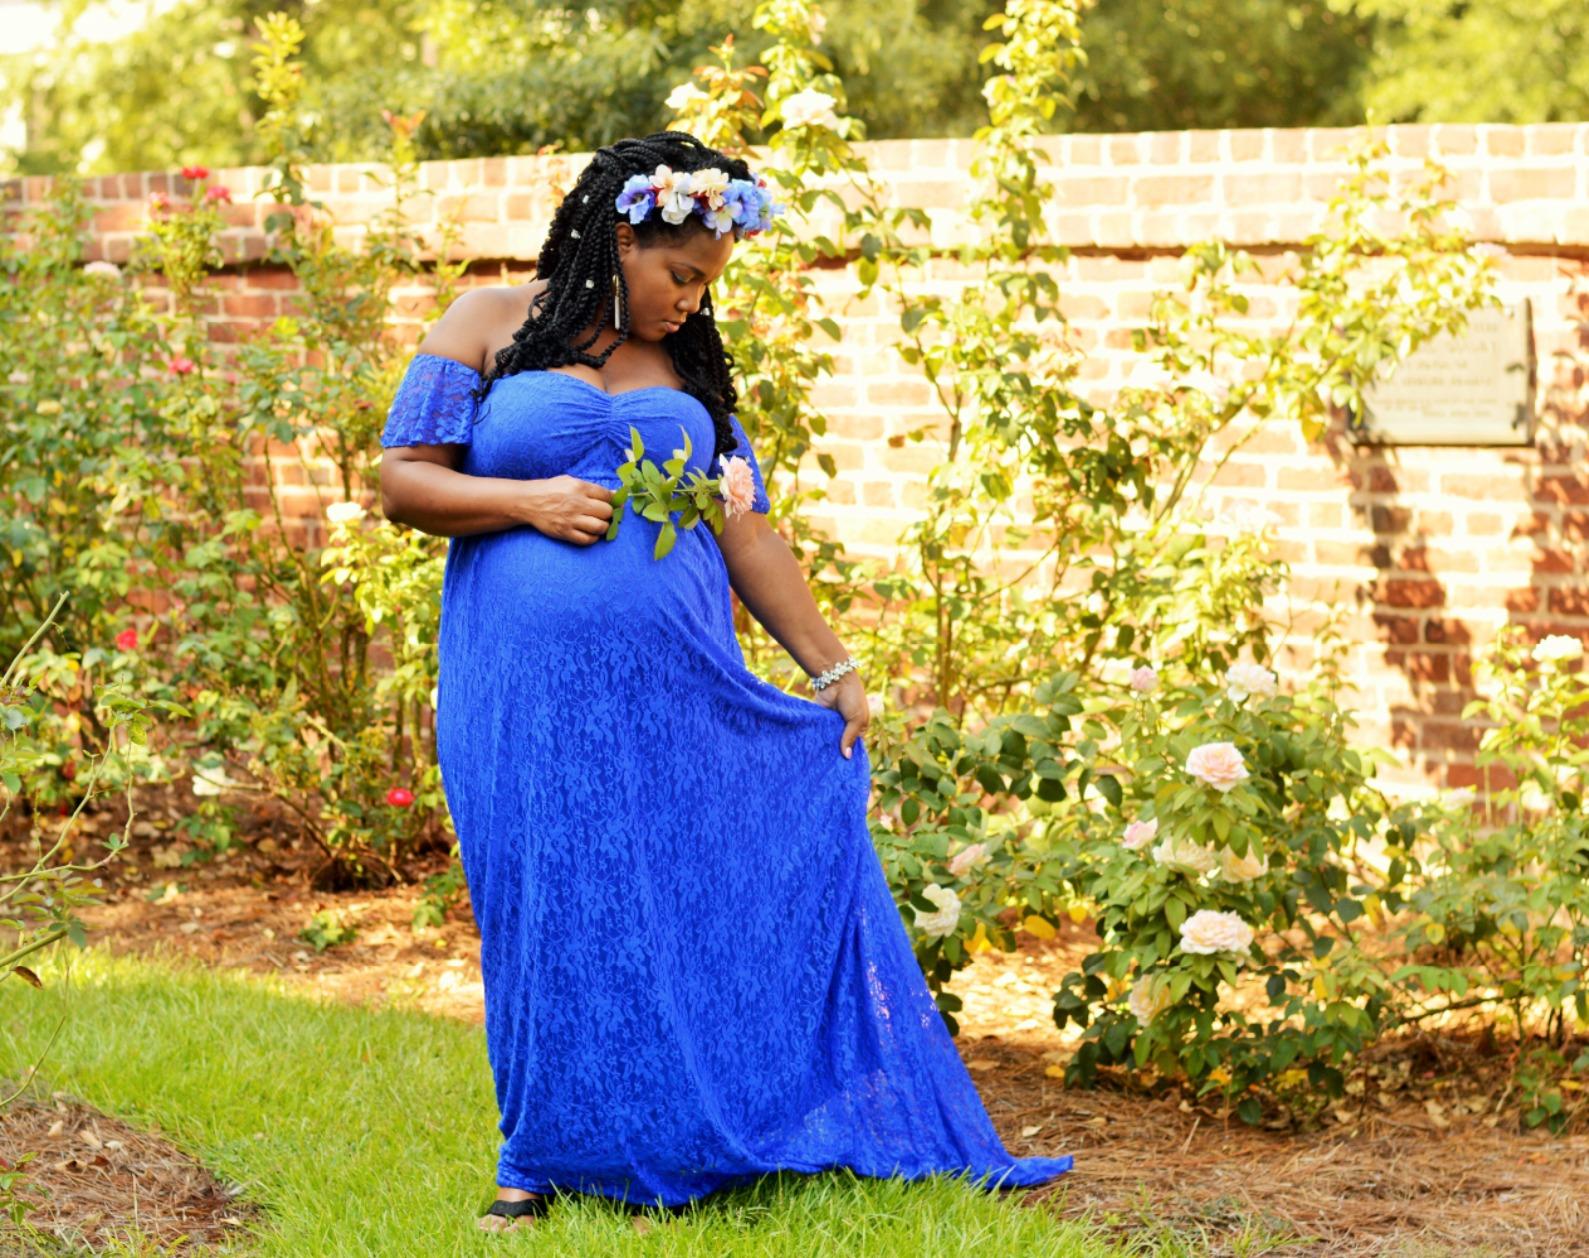 Plus Size Blue Ruffle Maternity Bridal Sleepwear Dress For Photoshoots,  Baby Showers, And Lingerie From Verycute, $34.26